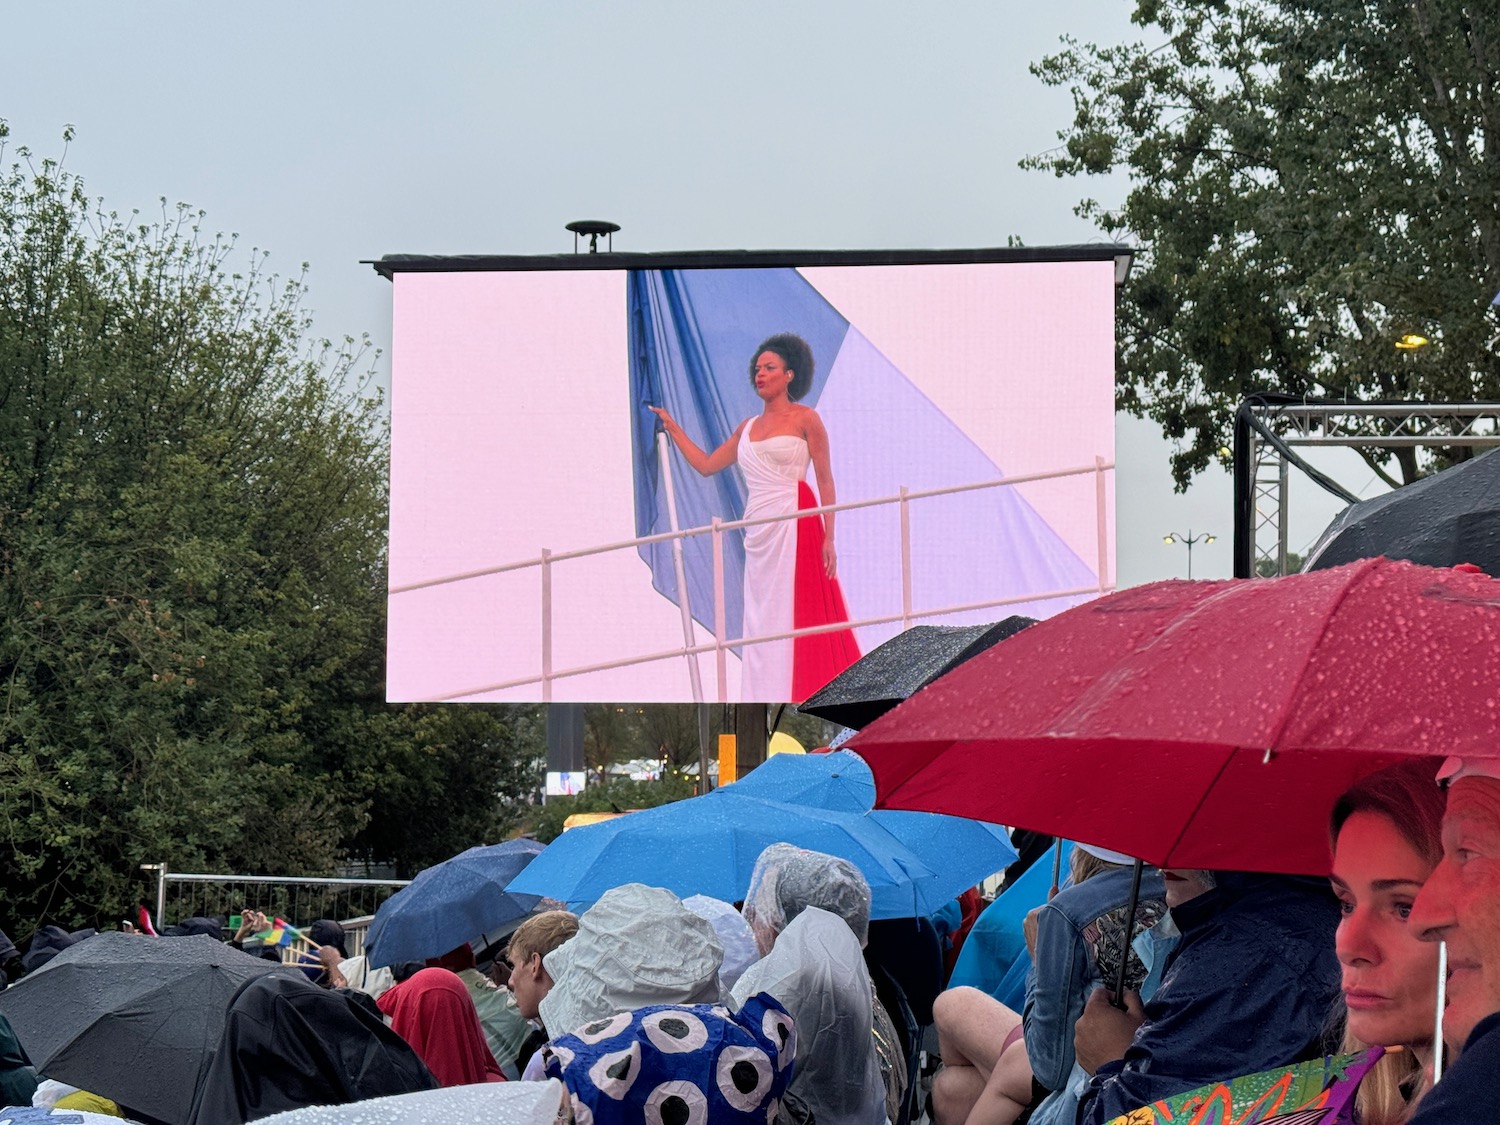 a woman in a white dress standing on a stage with a large screen